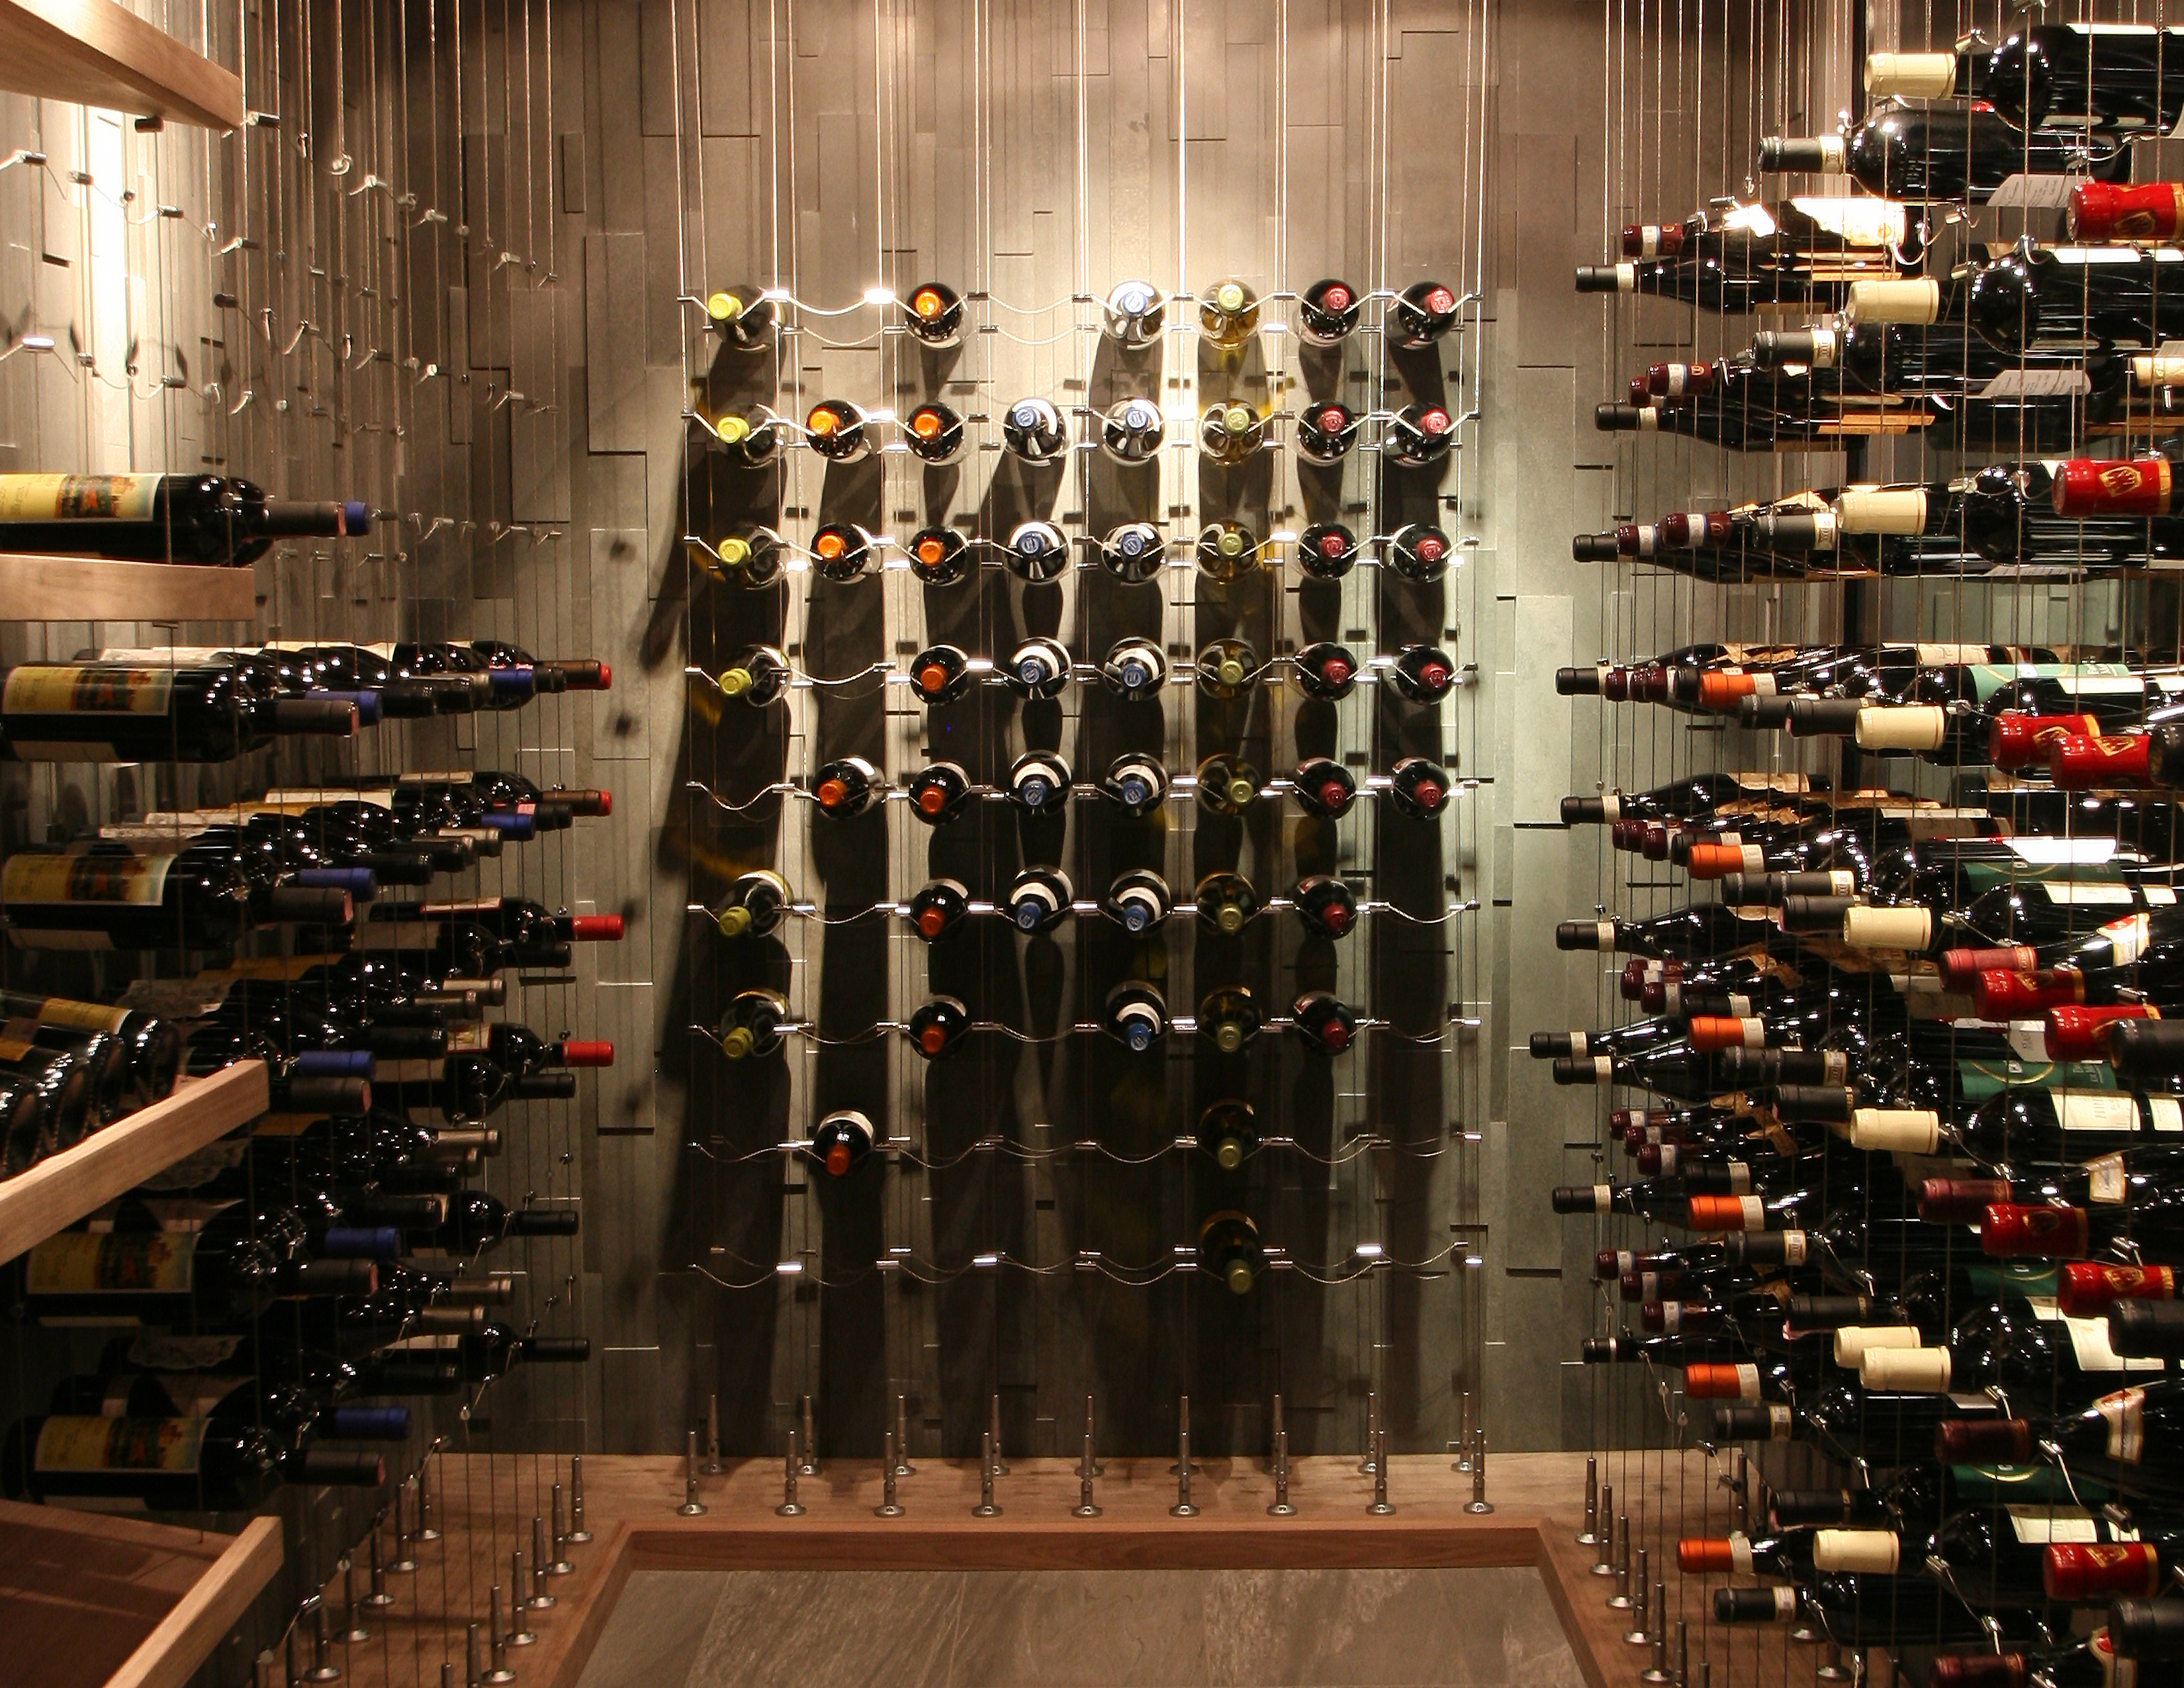 Learn about custom wine cellar design here!